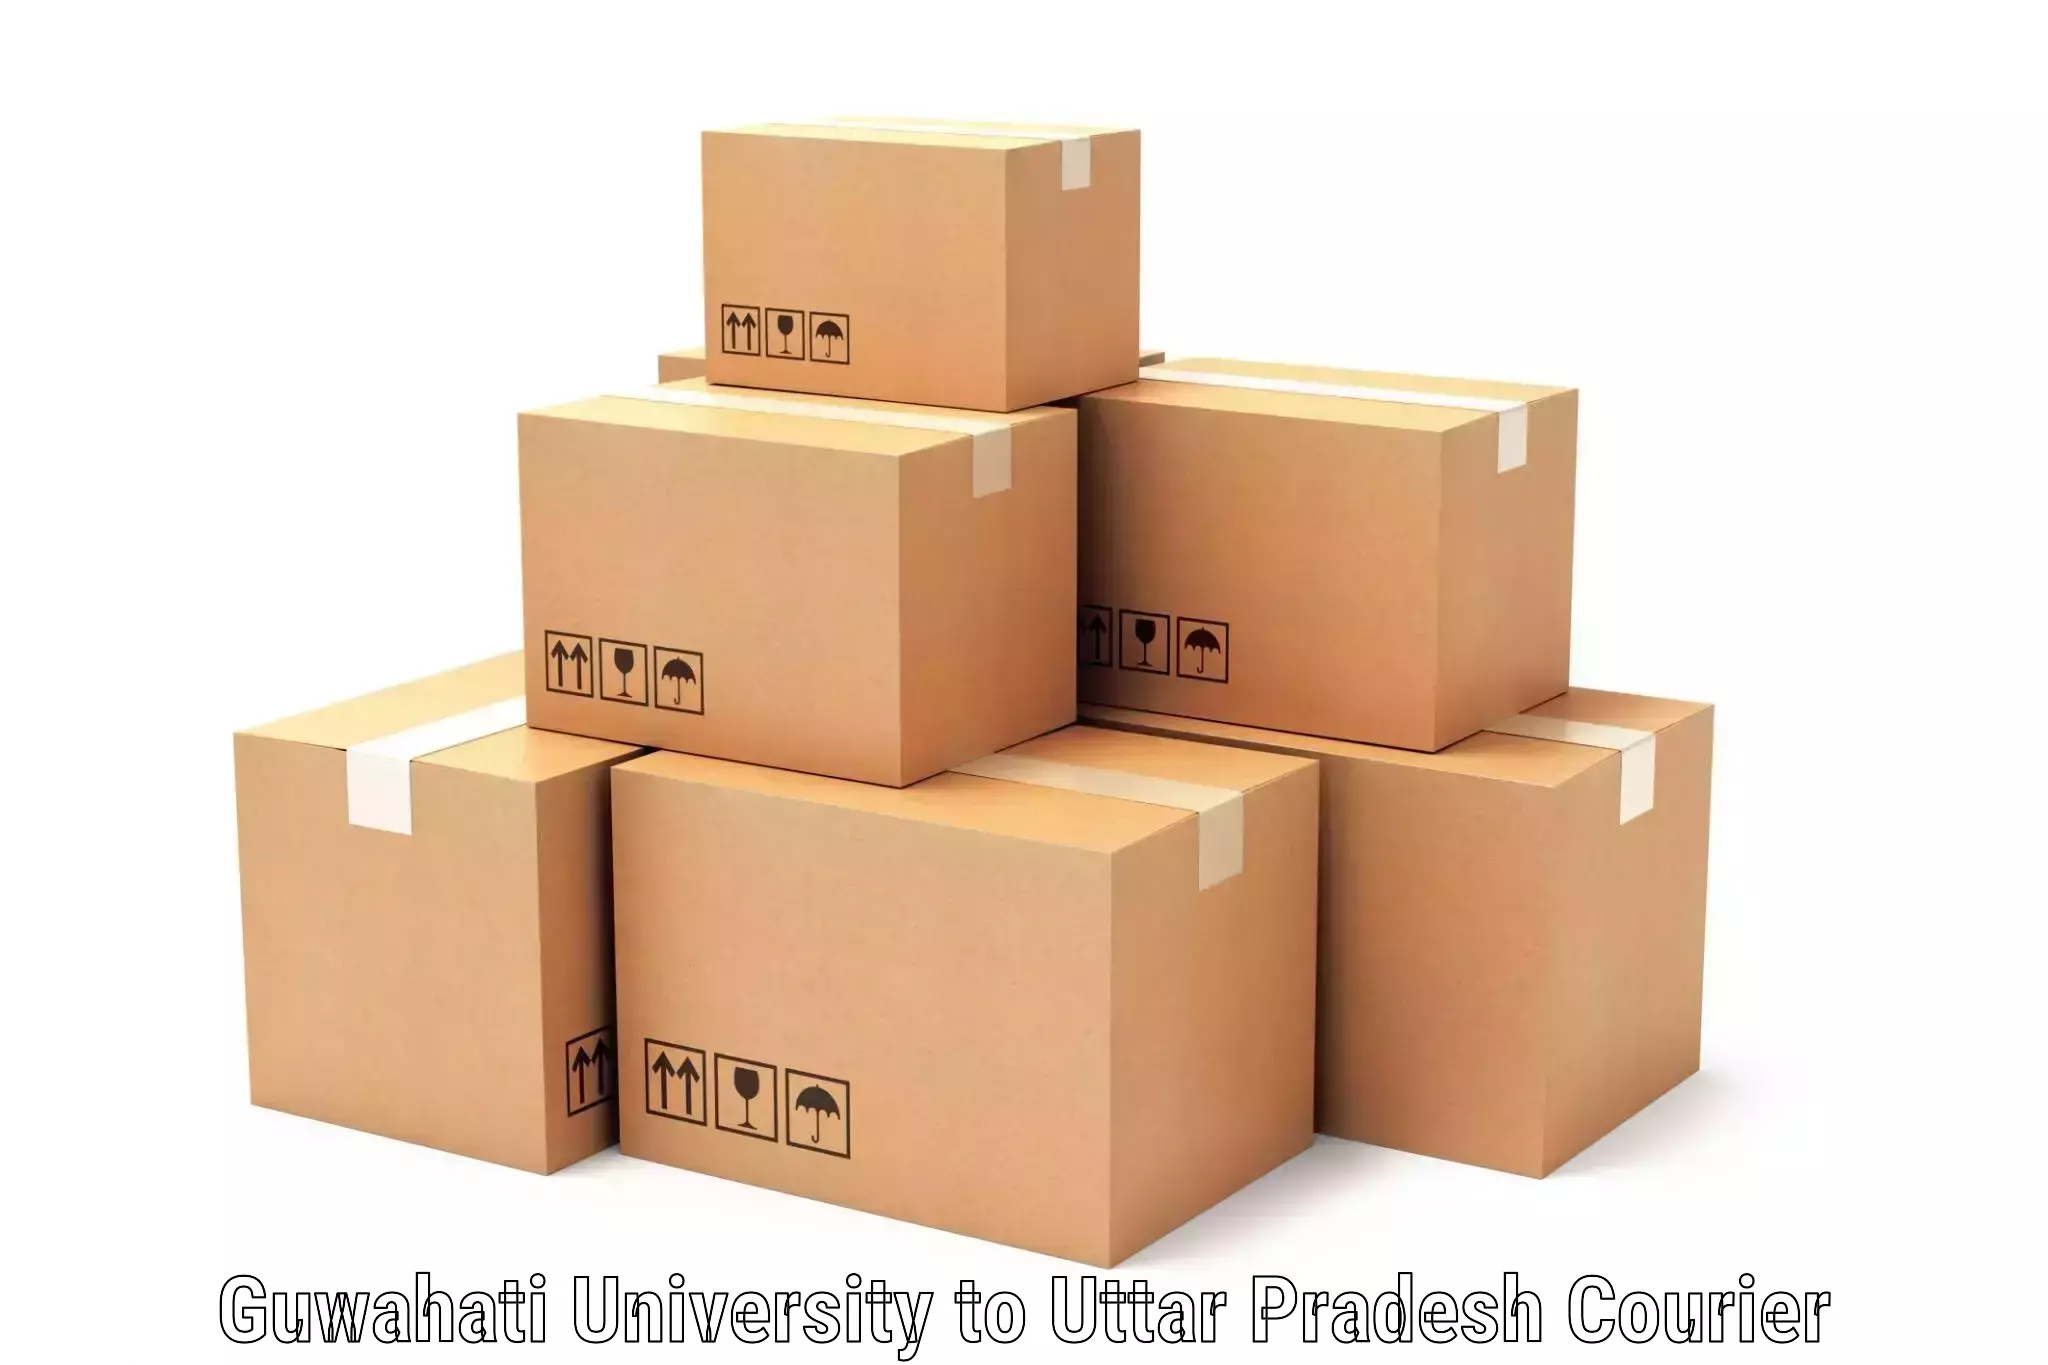 Reliable parcel services Guwahati University to Konch